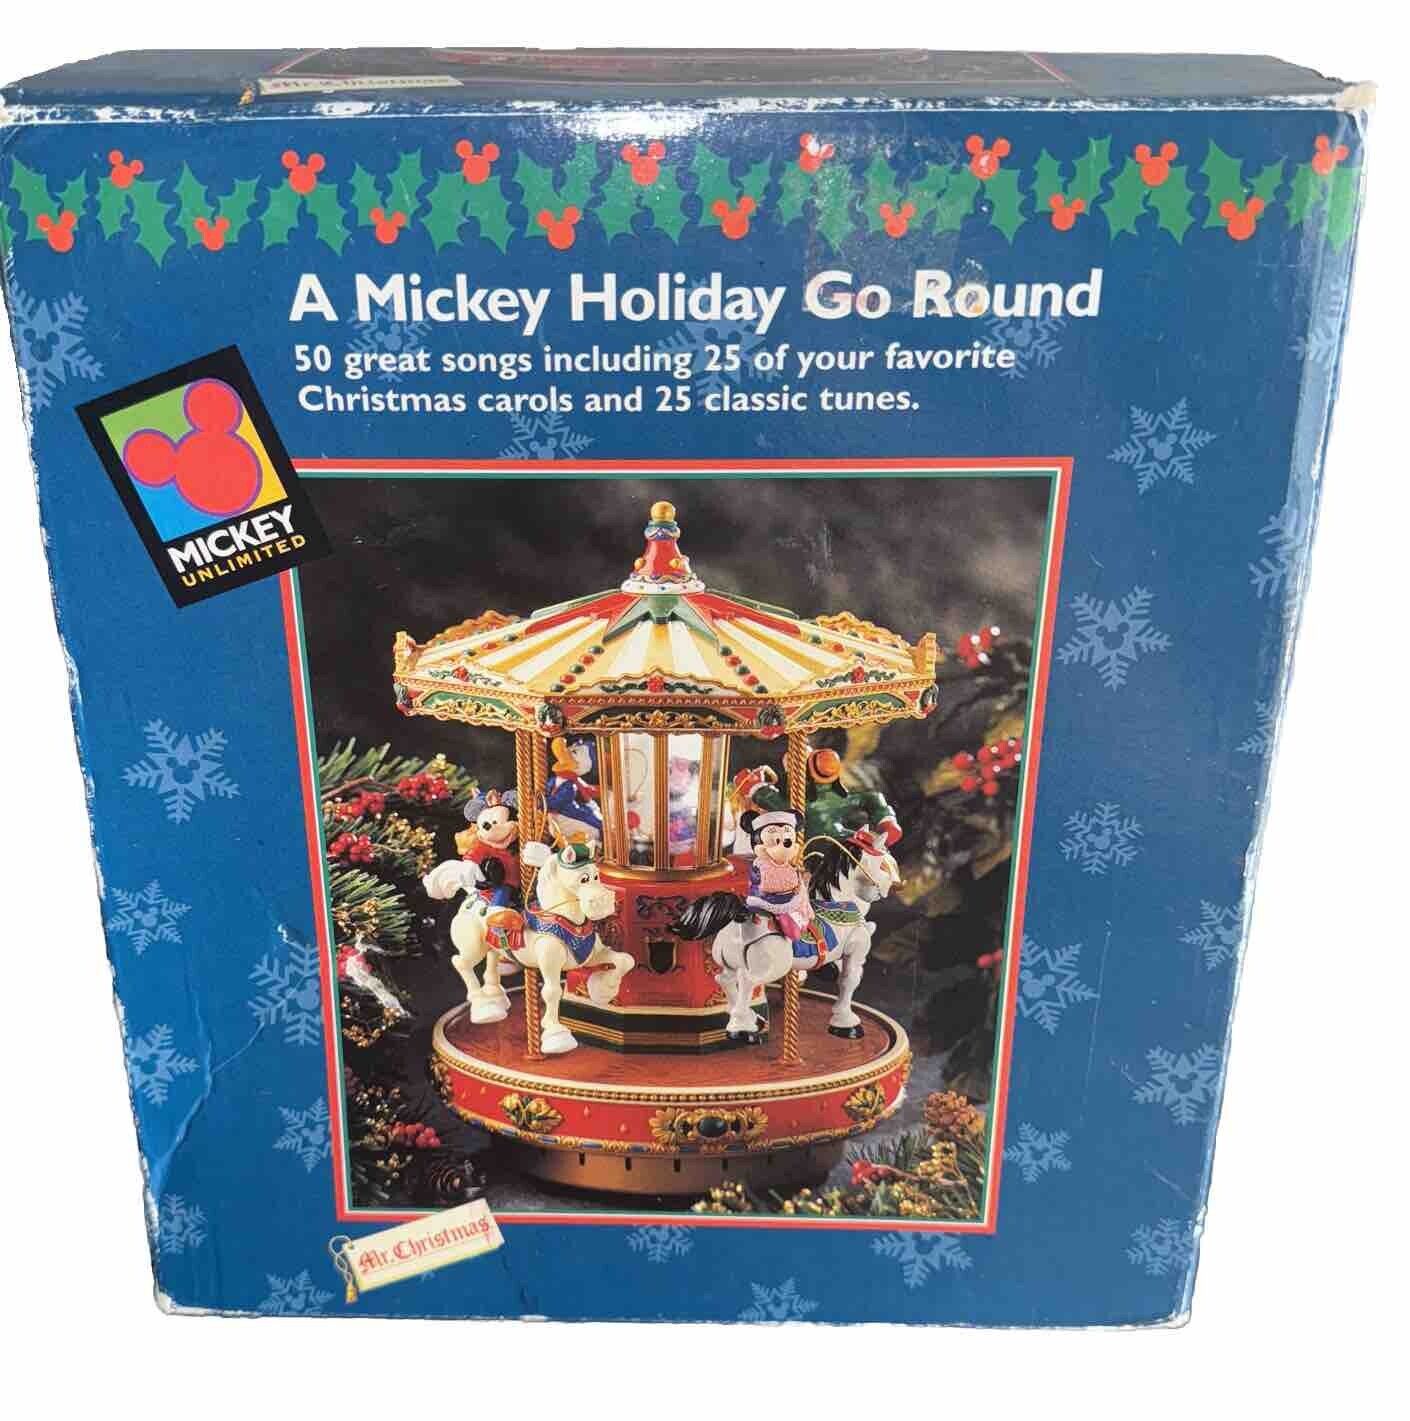 1996 Mr. Christmas Disney A Mickey Holiday Go Round Carousel Works In Box *Read*